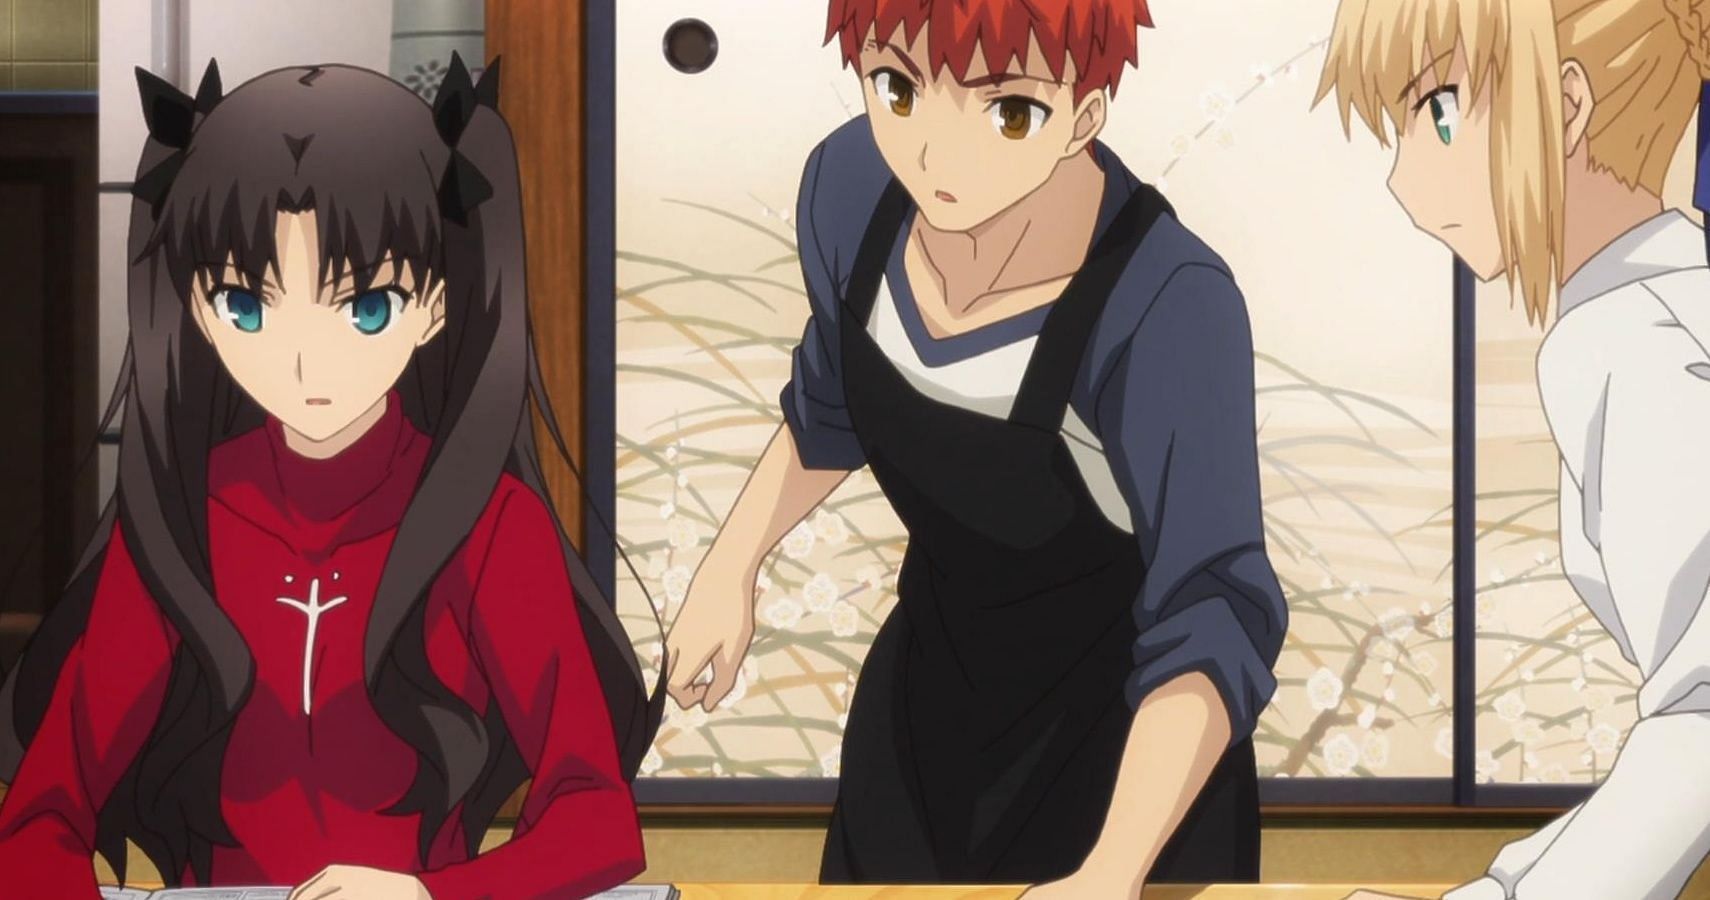 From left to right, Rin Tohsaka, Shirou Emiya, and Saber as they're seen in the TV anime adaptation. (Image via Ufotable Studio)